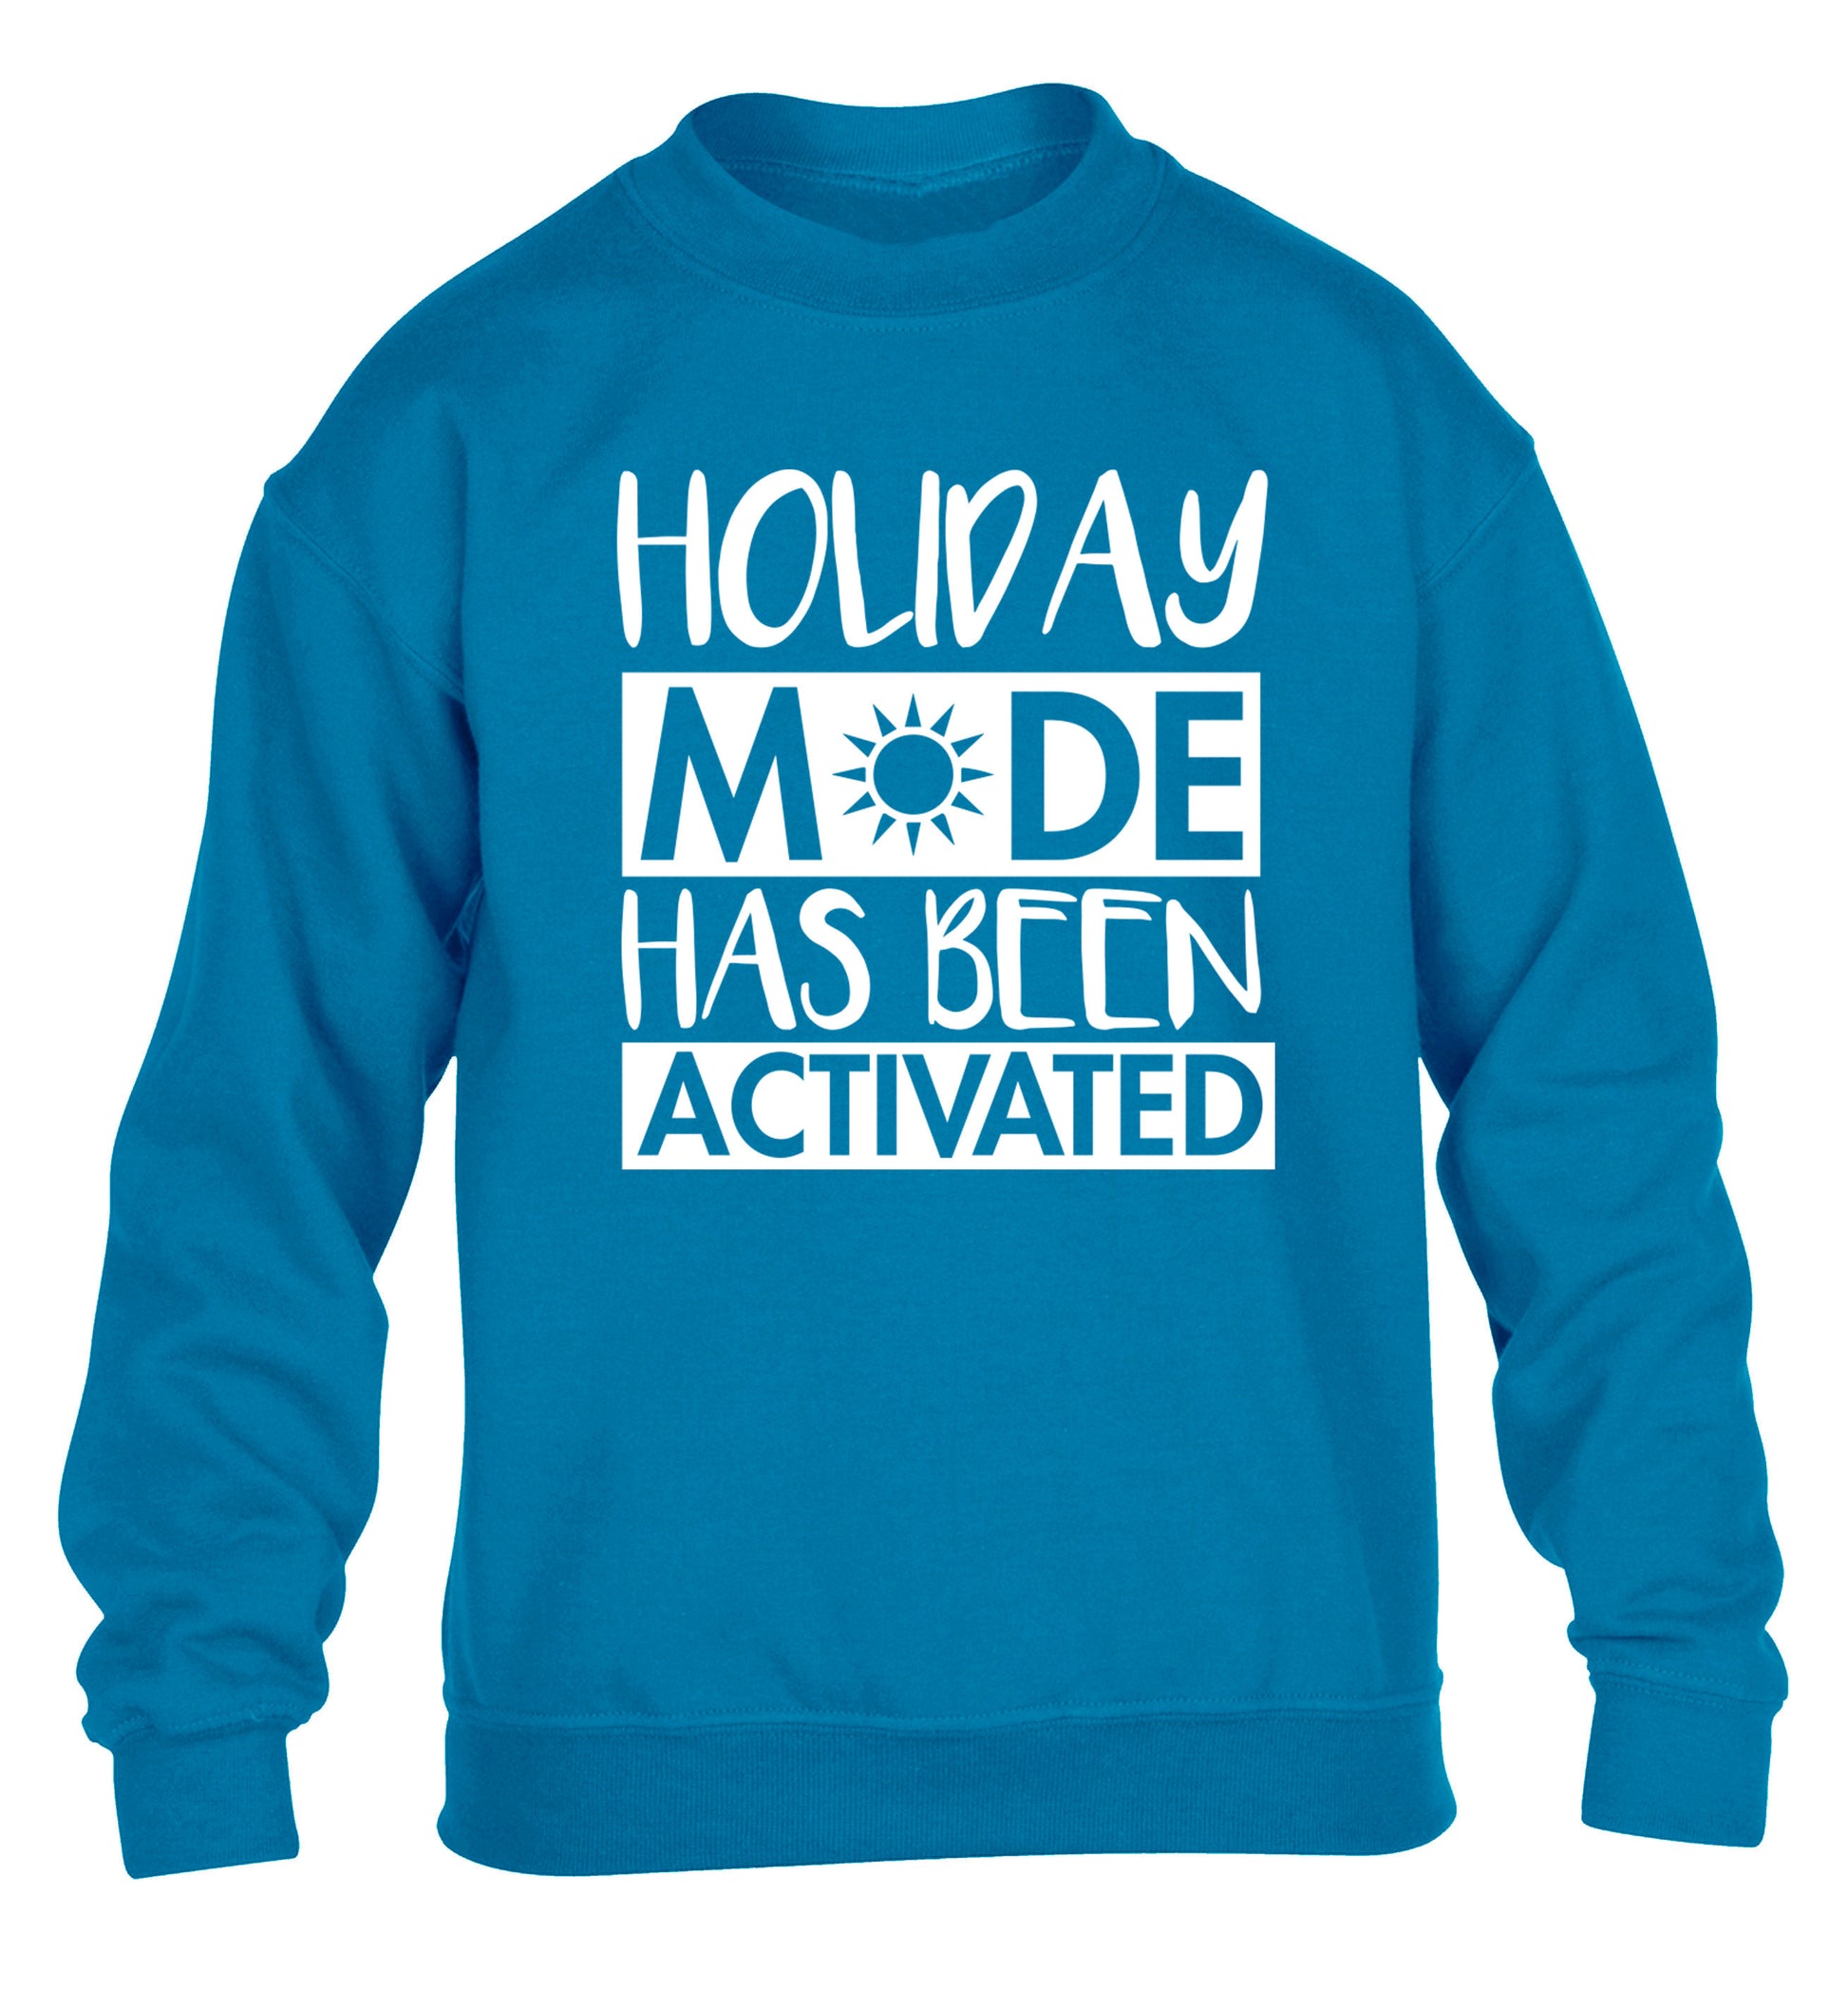 Holiday mode has been activated children's blue sweater 12-14 Years